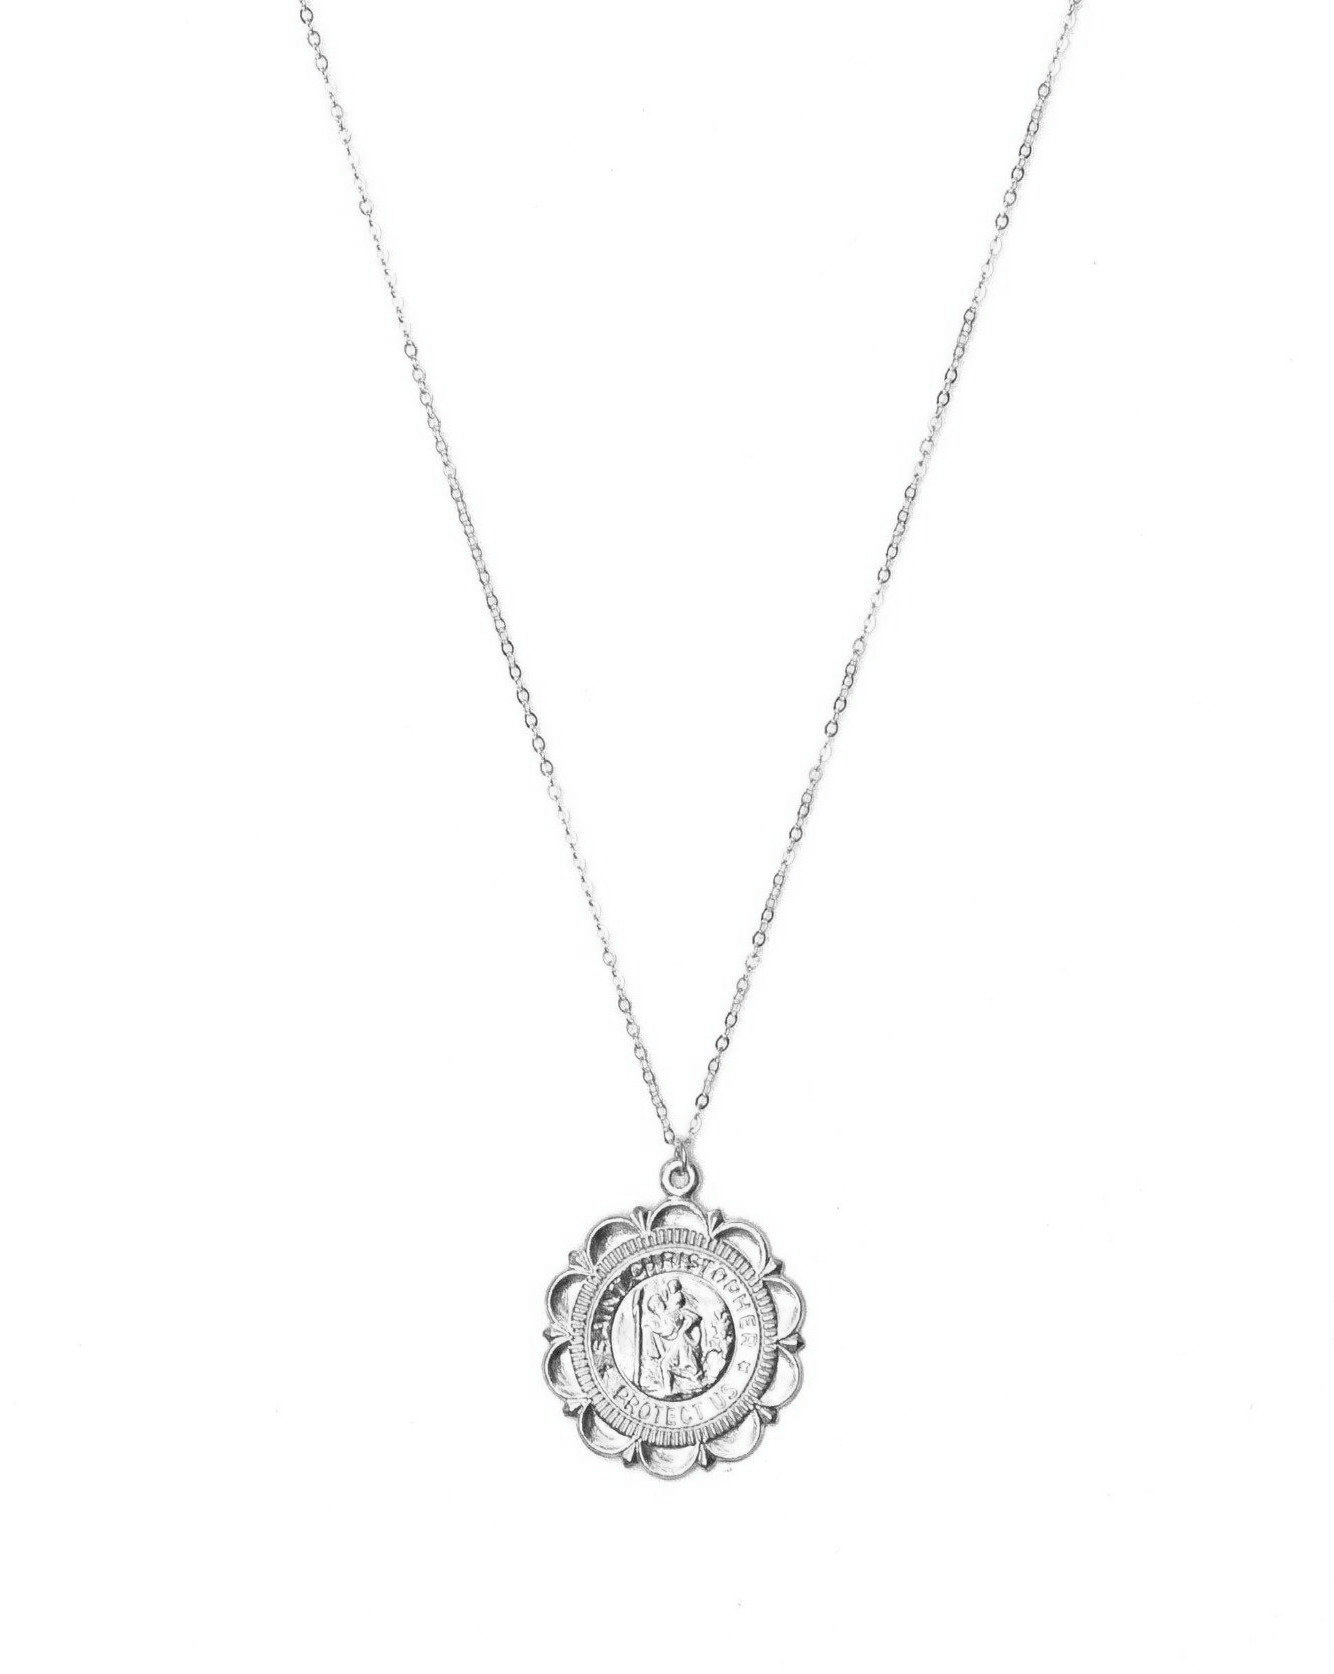 San Cris Long Necklace by KOZAKH. A 20 inches long necklace, crafted in Sterling Silver, featuring a 16mm Saint Christopher Medallion.